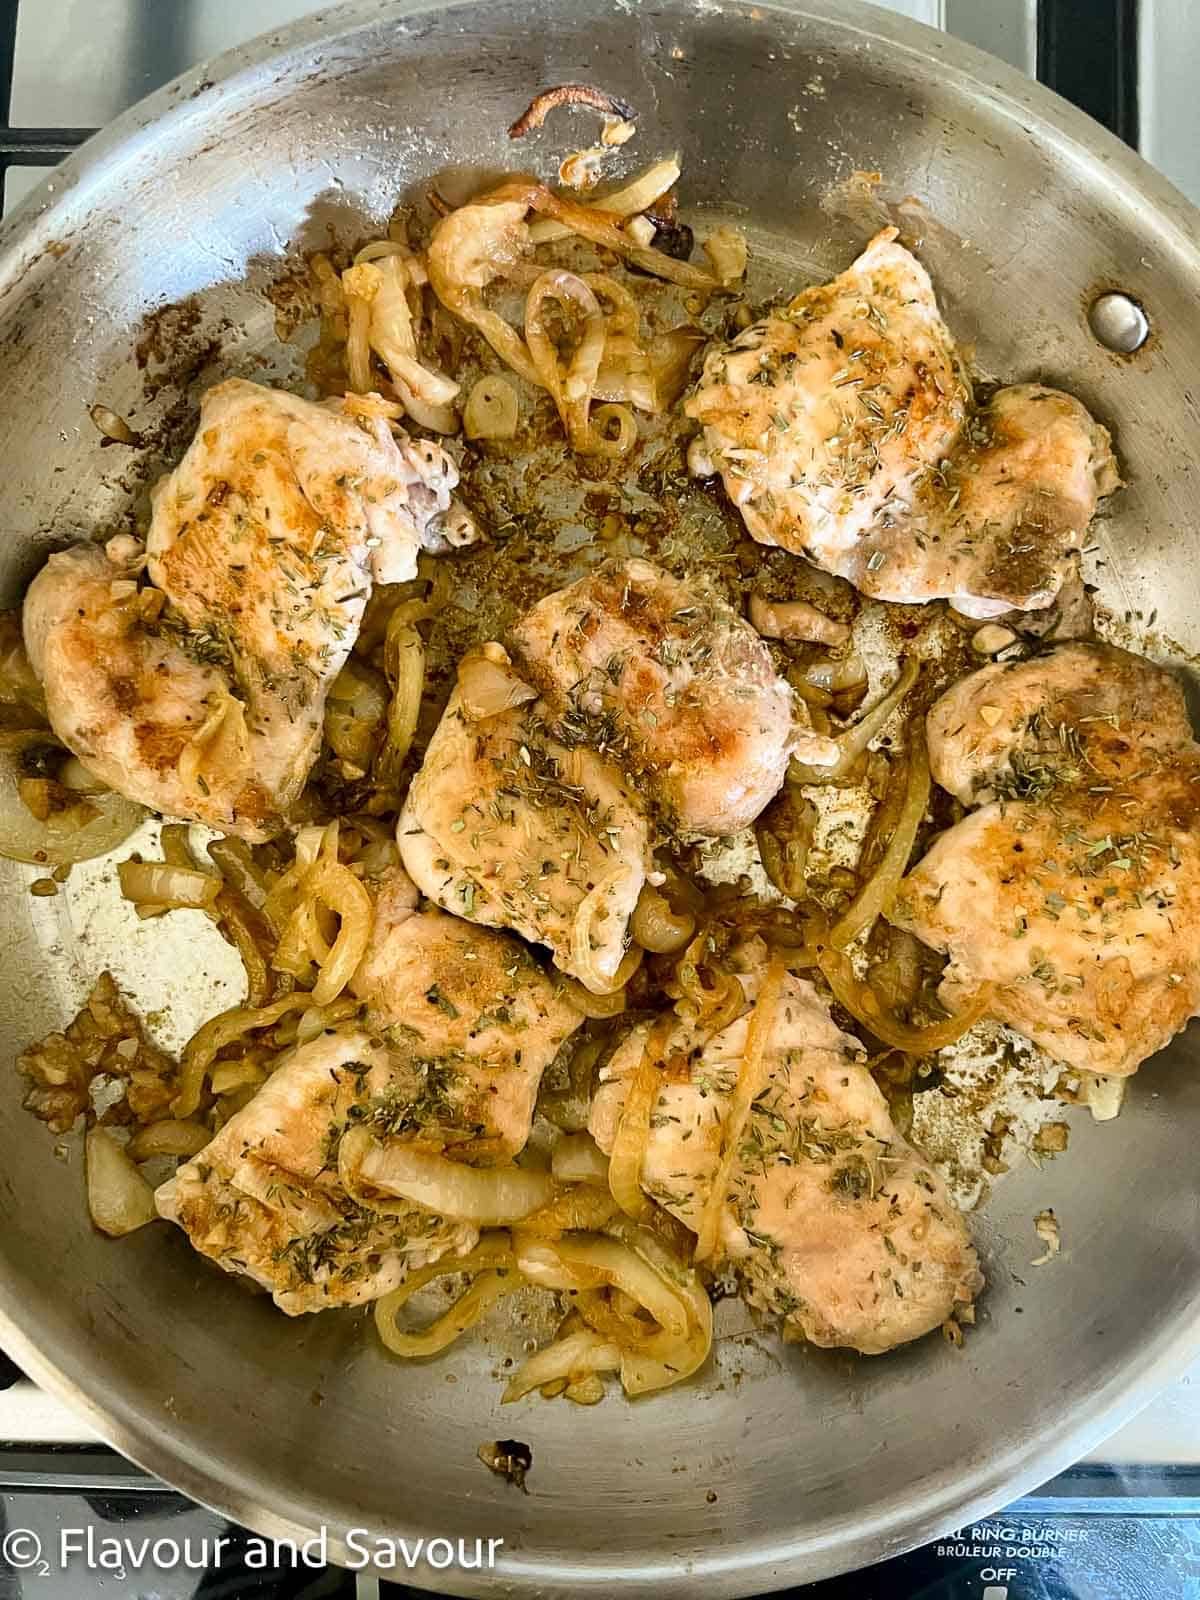 Seared chicken thighs with onions and garlic in a skillet.